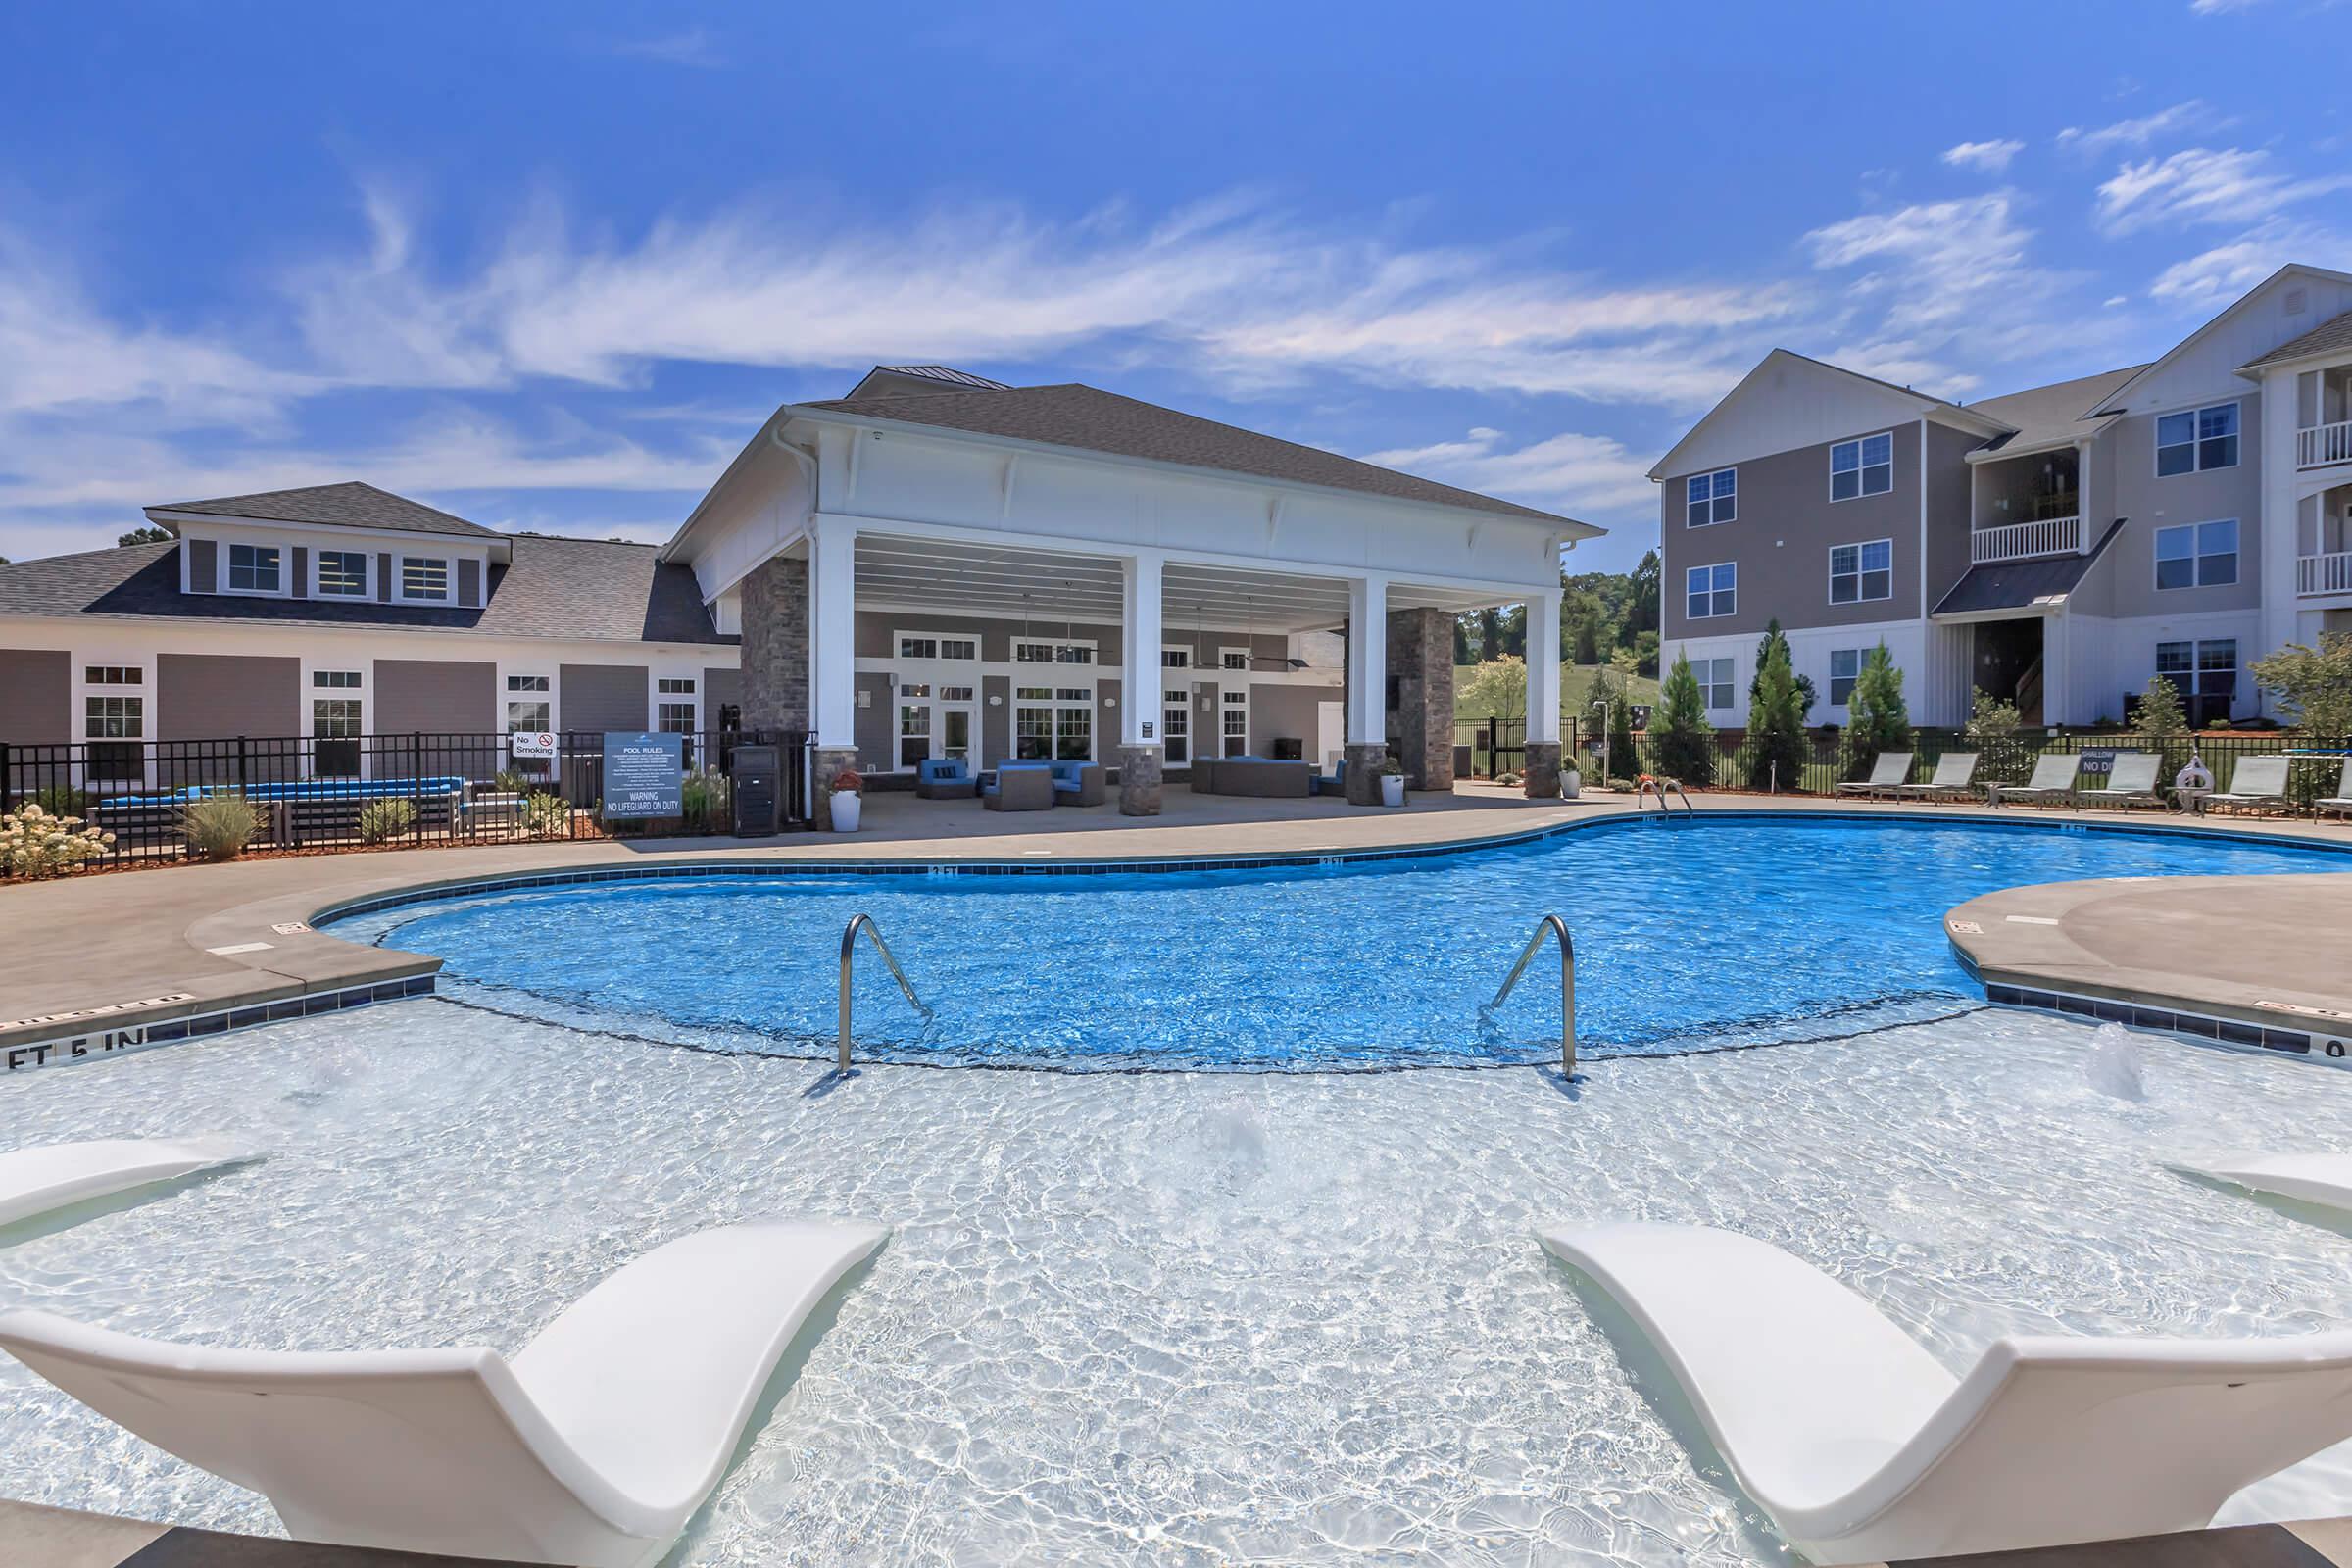 Catch Some Rays At Riverstone Apartments At Long Shoals In Arden, NC